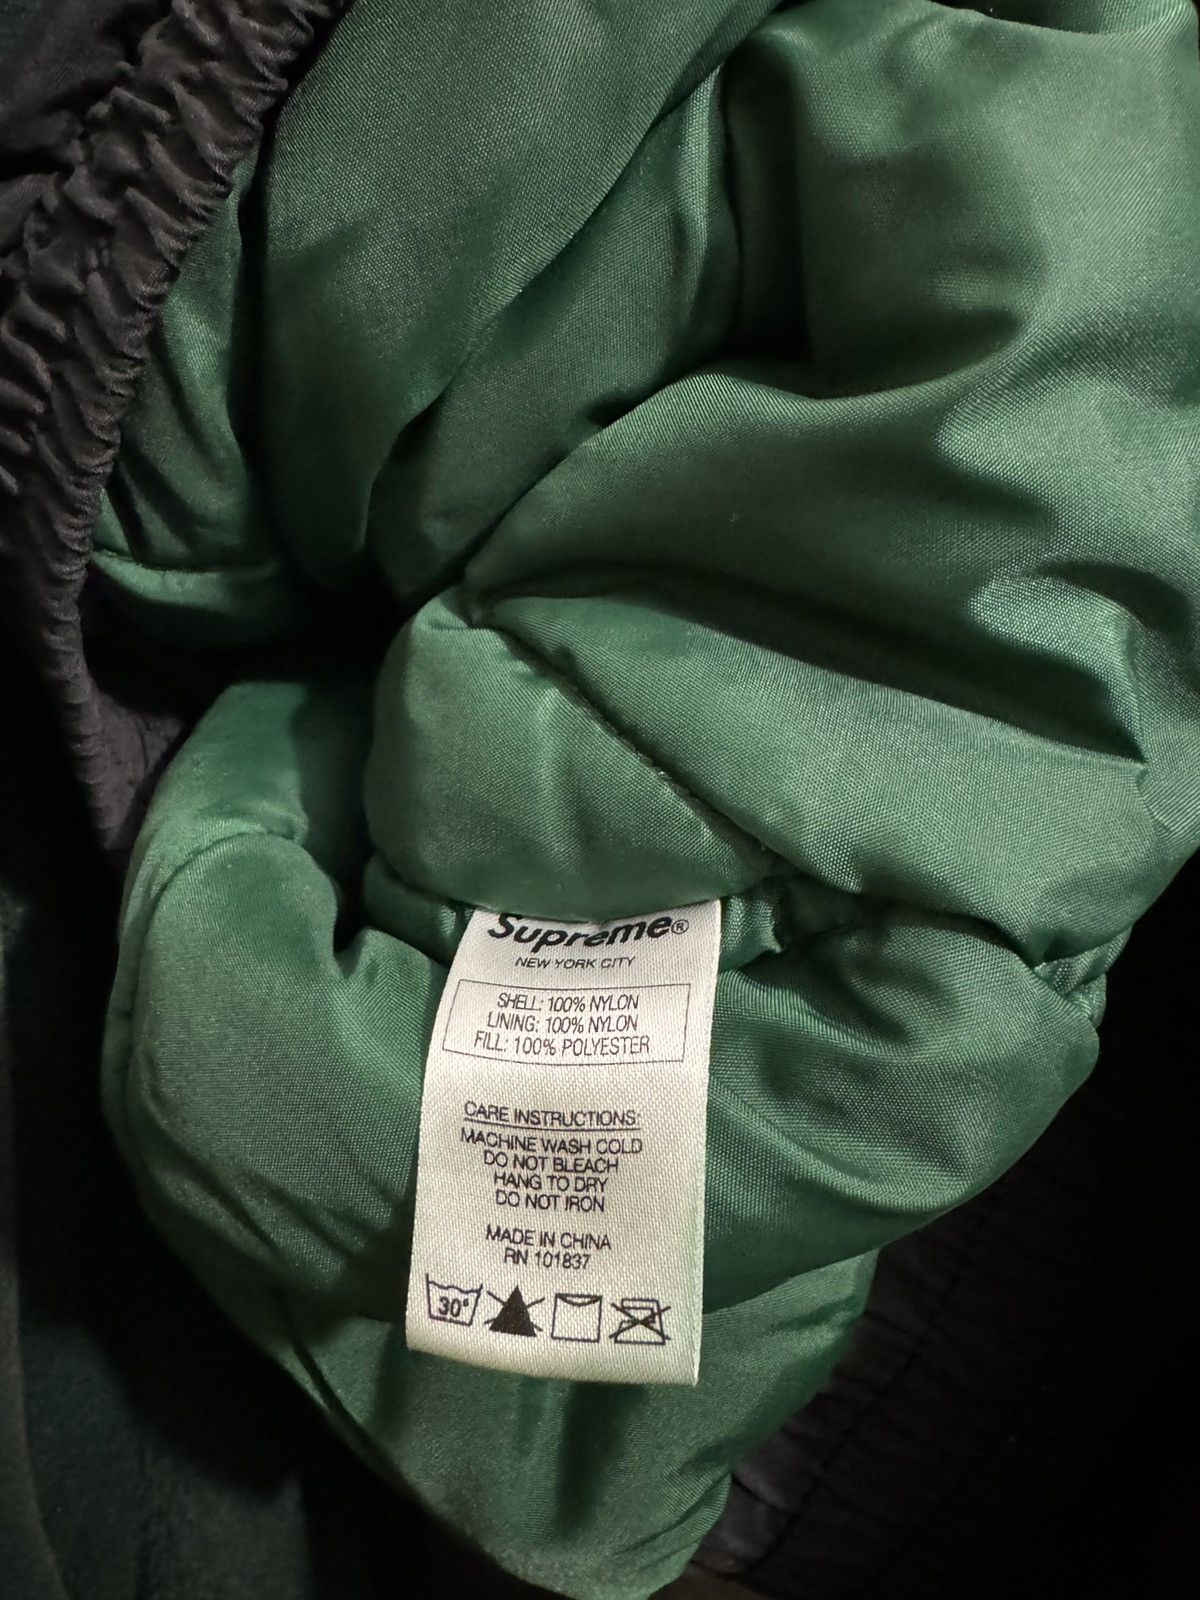 Supreme Supreme Puffy Hockey Pullover Green Large | Grailed